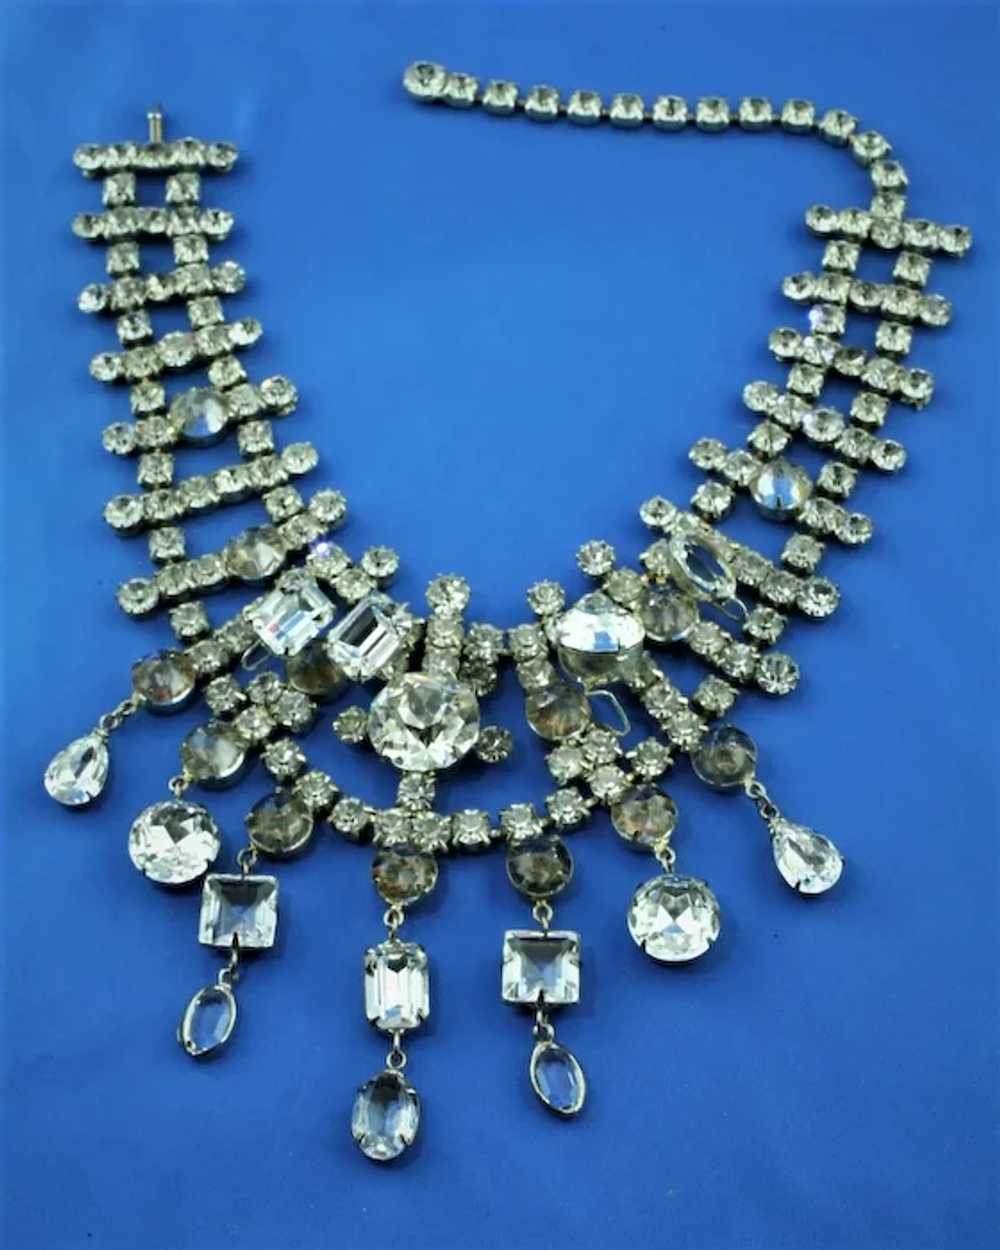 Kenneth Lane for Dynasty Necklace and Earrings - image 4